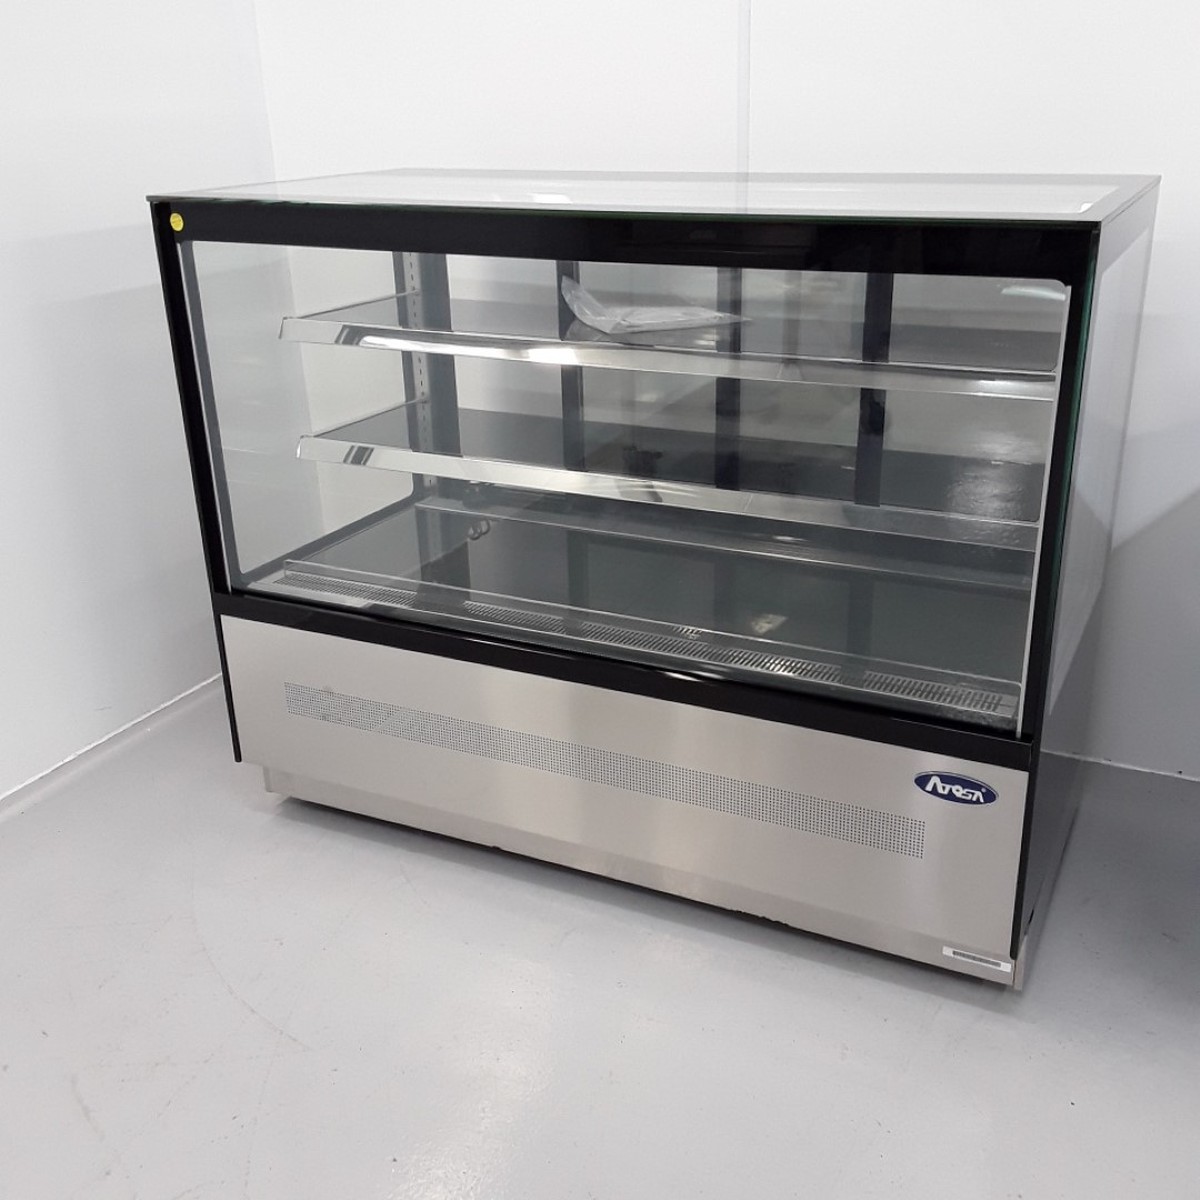 Secondhand Catering Equipment Refrigerated Display Counters